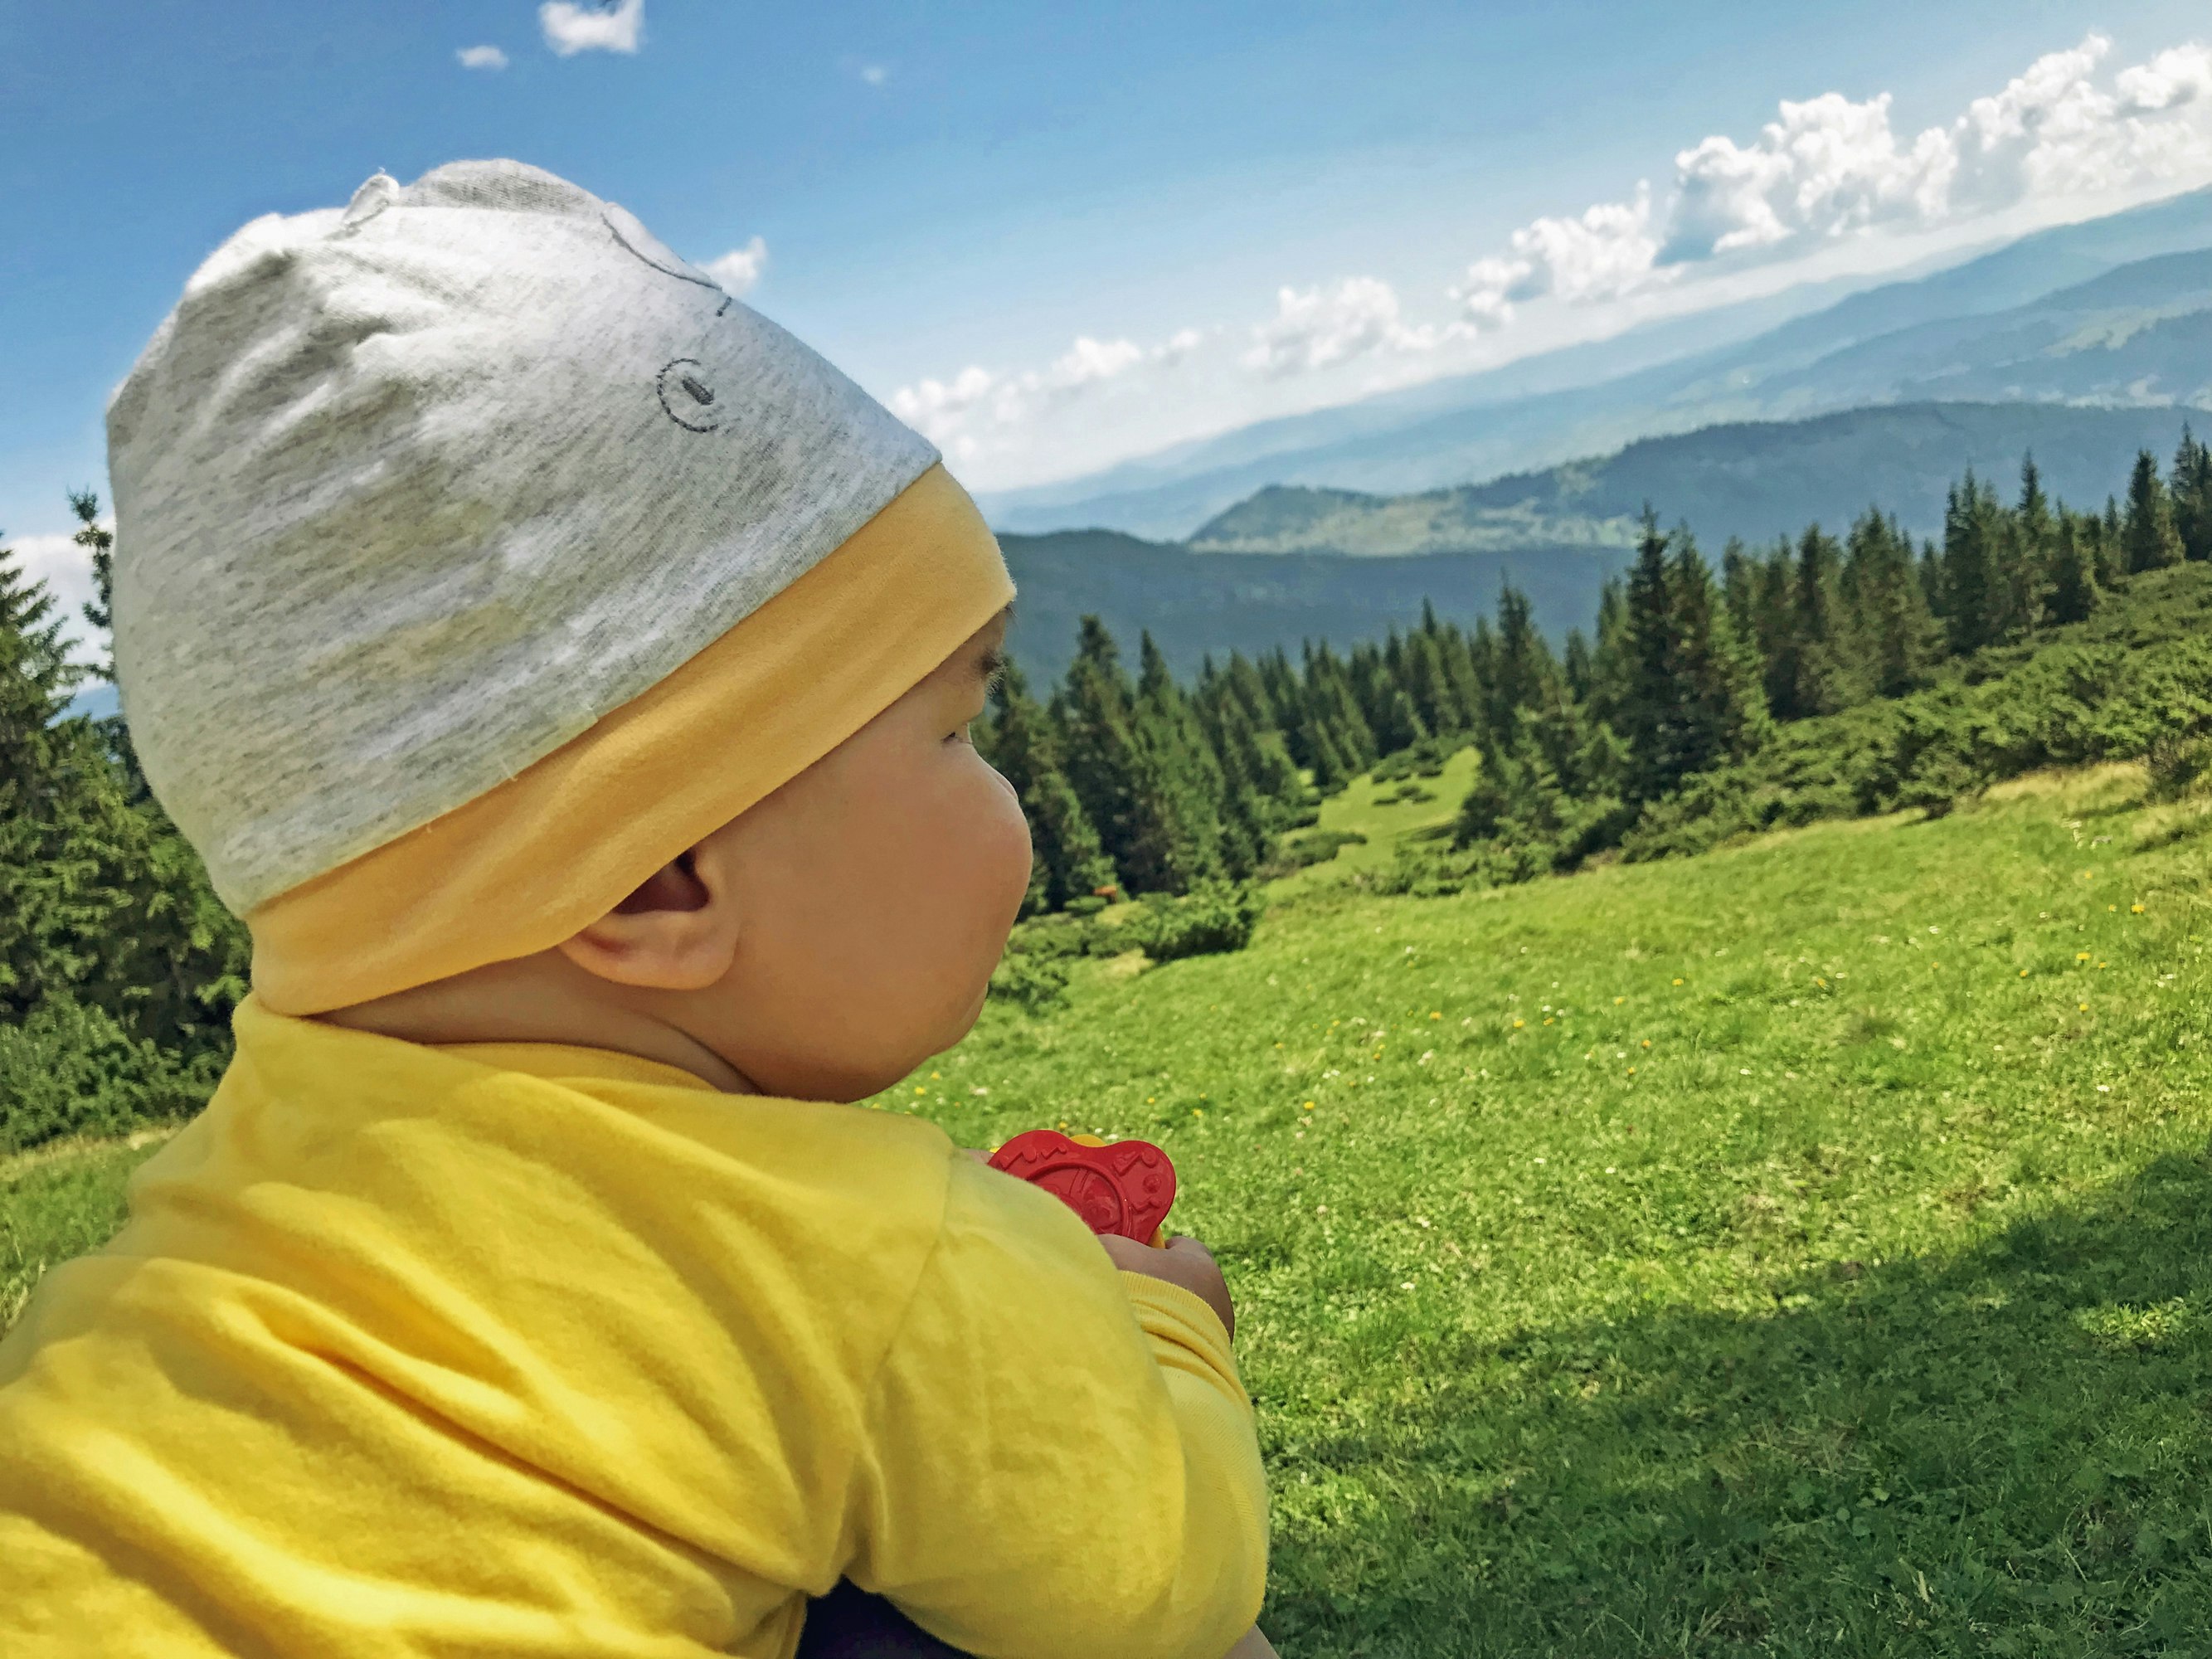 A very young baby wears bright yellow pajamas and a knit hat as he looks out on a mountain vista; kids outdoors adventures